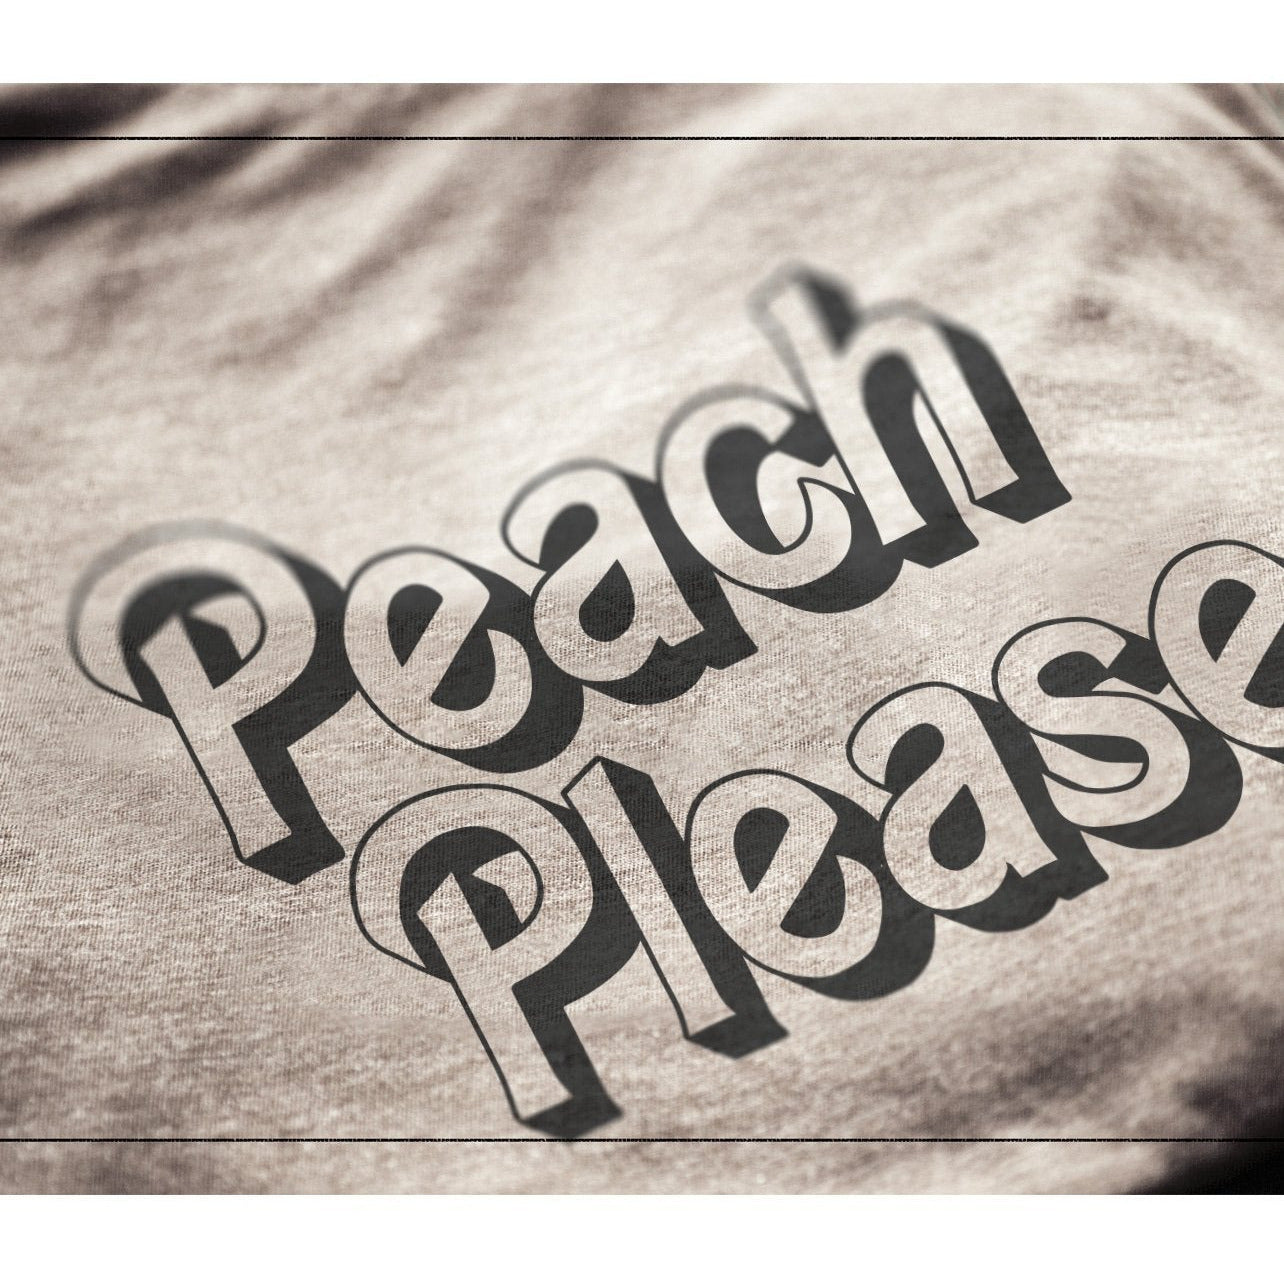 Peach, Please - Stories You Can Wear by Thread Tank